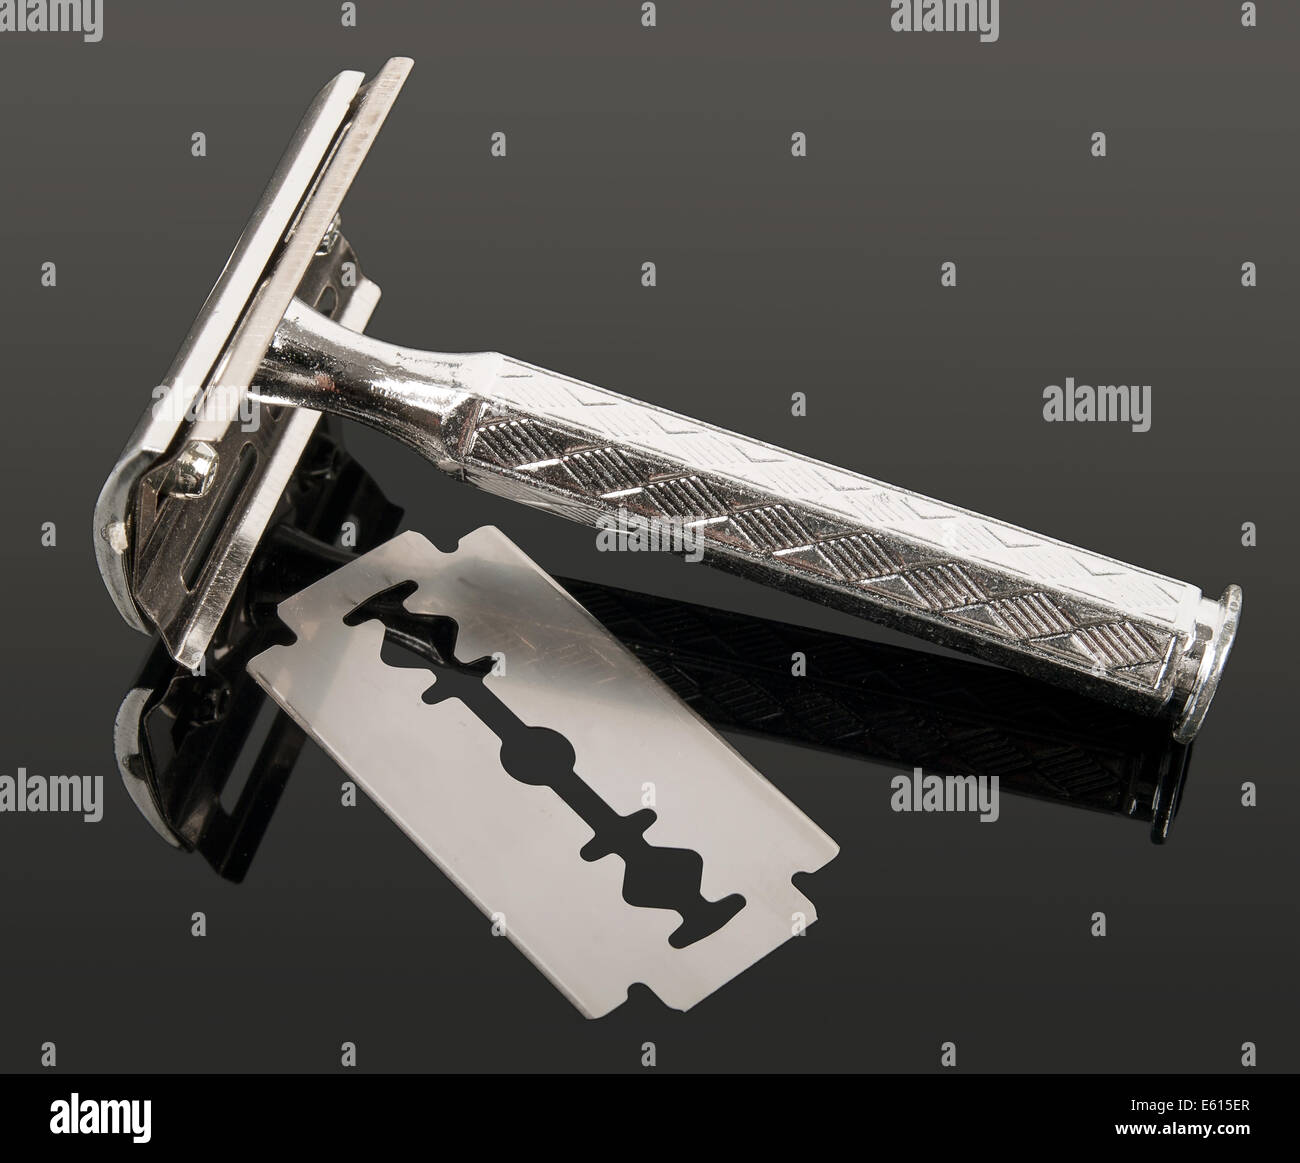 vintage razor and blade with reflection isolated on gray background Stock Photo